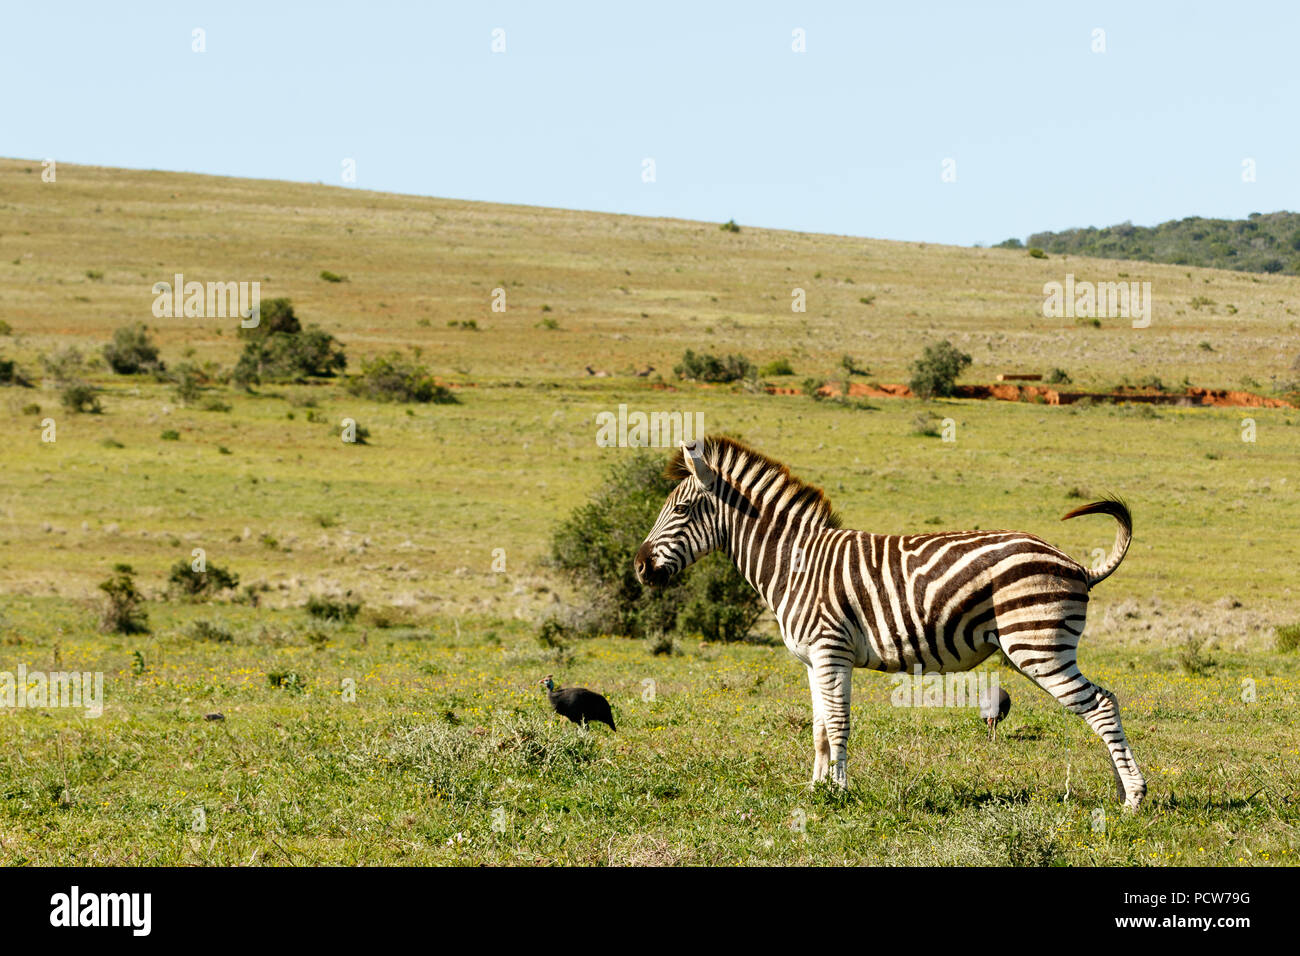 Zebra standing in the field wetting the grass Stock Photo